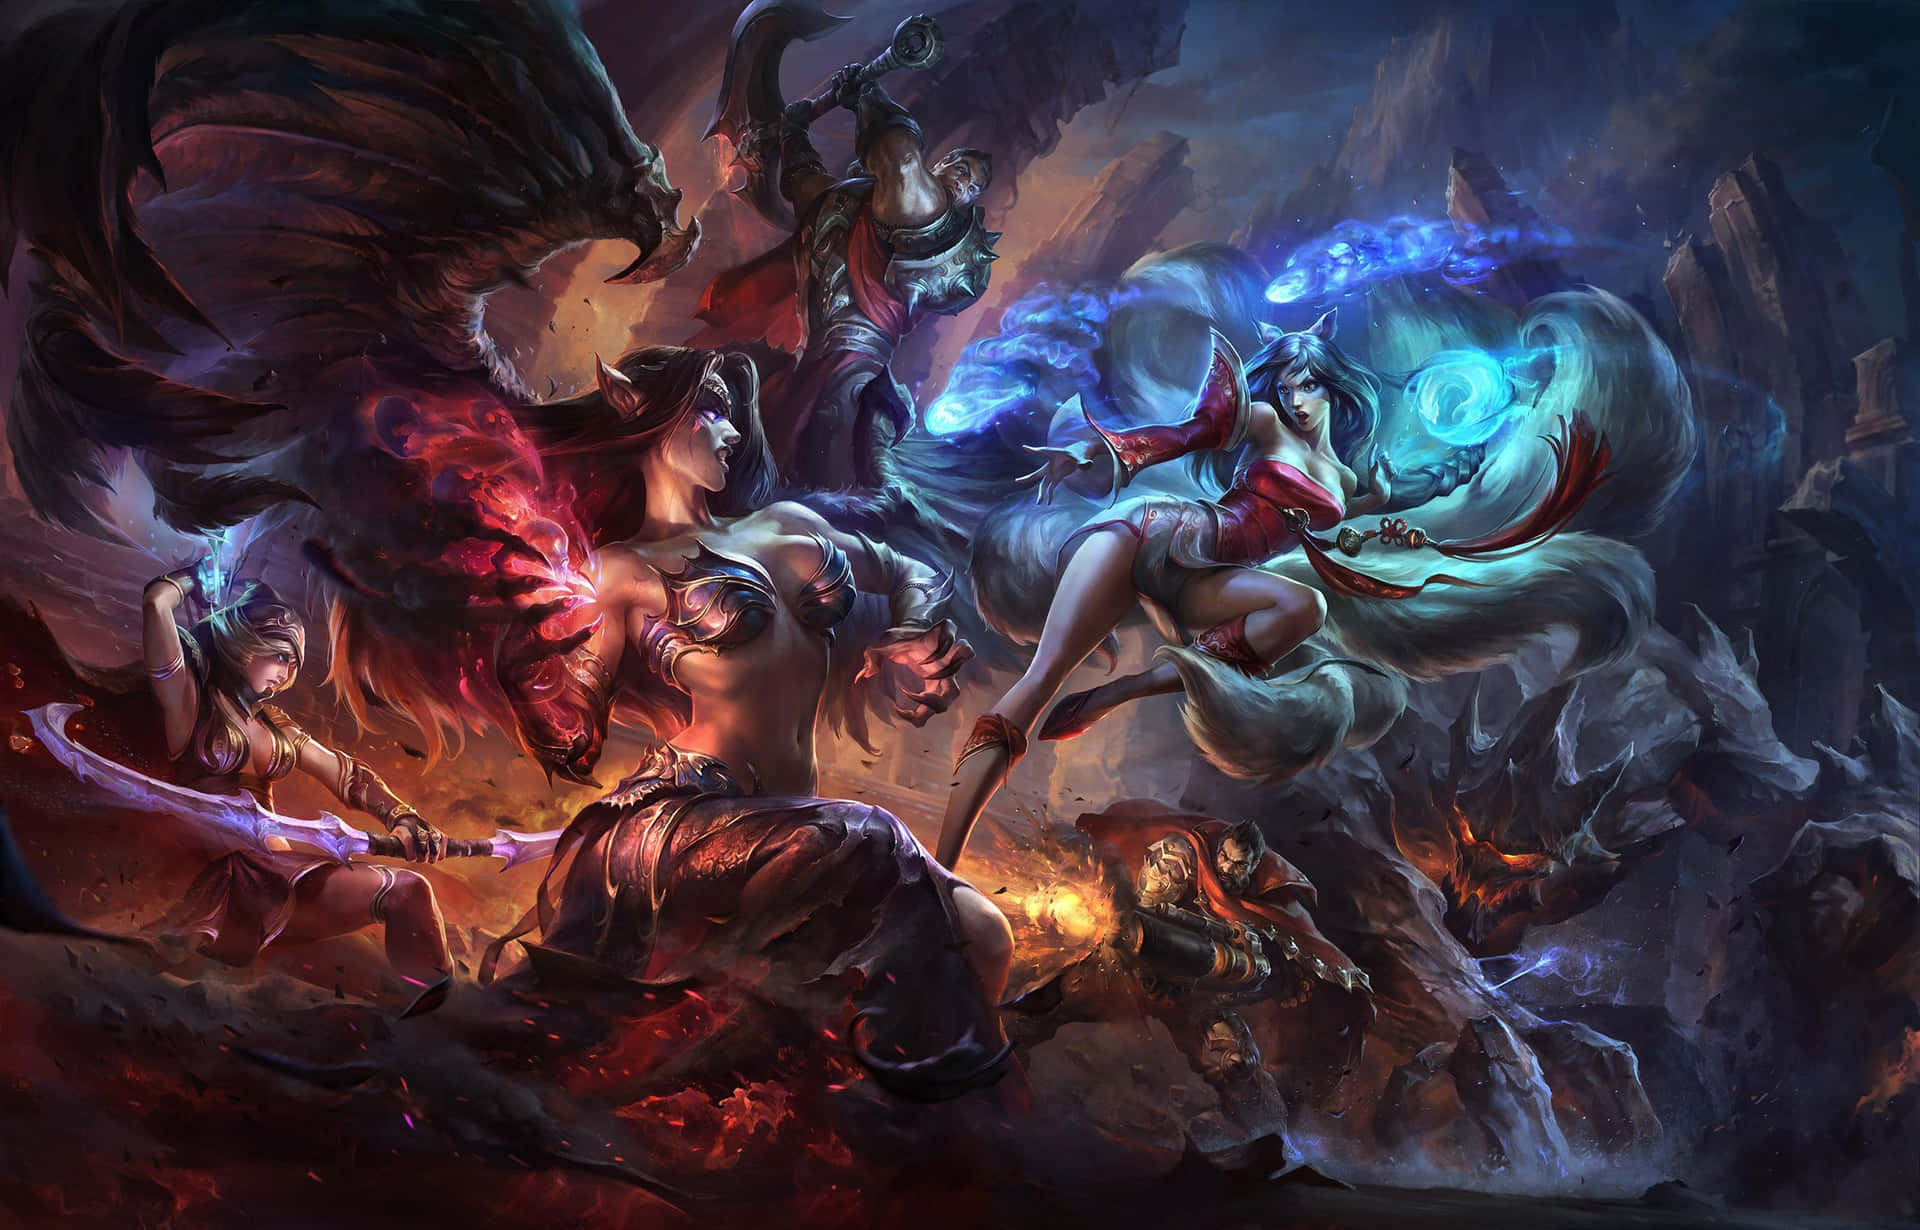 Get your game face on - immerse yourself in the virtual world of League of Legends on a laptop Wallpaper